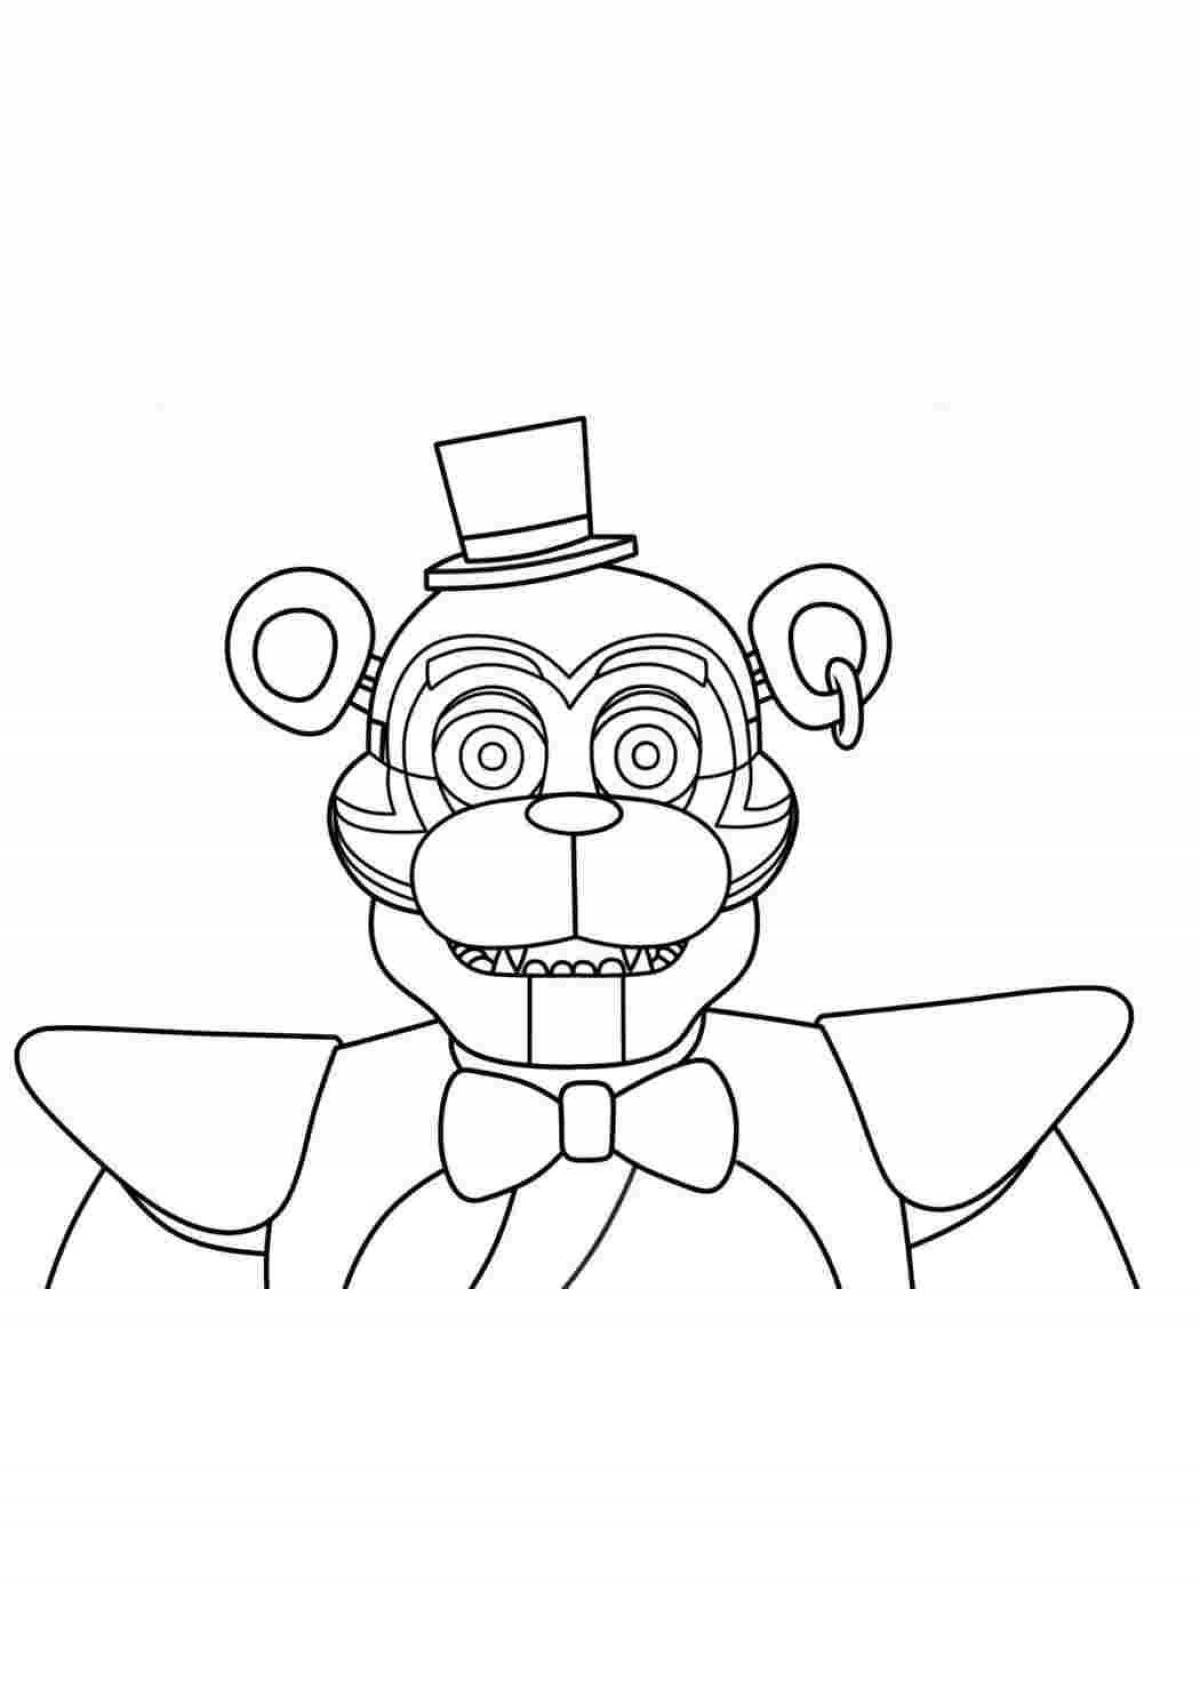 Freddy colorful coloring book